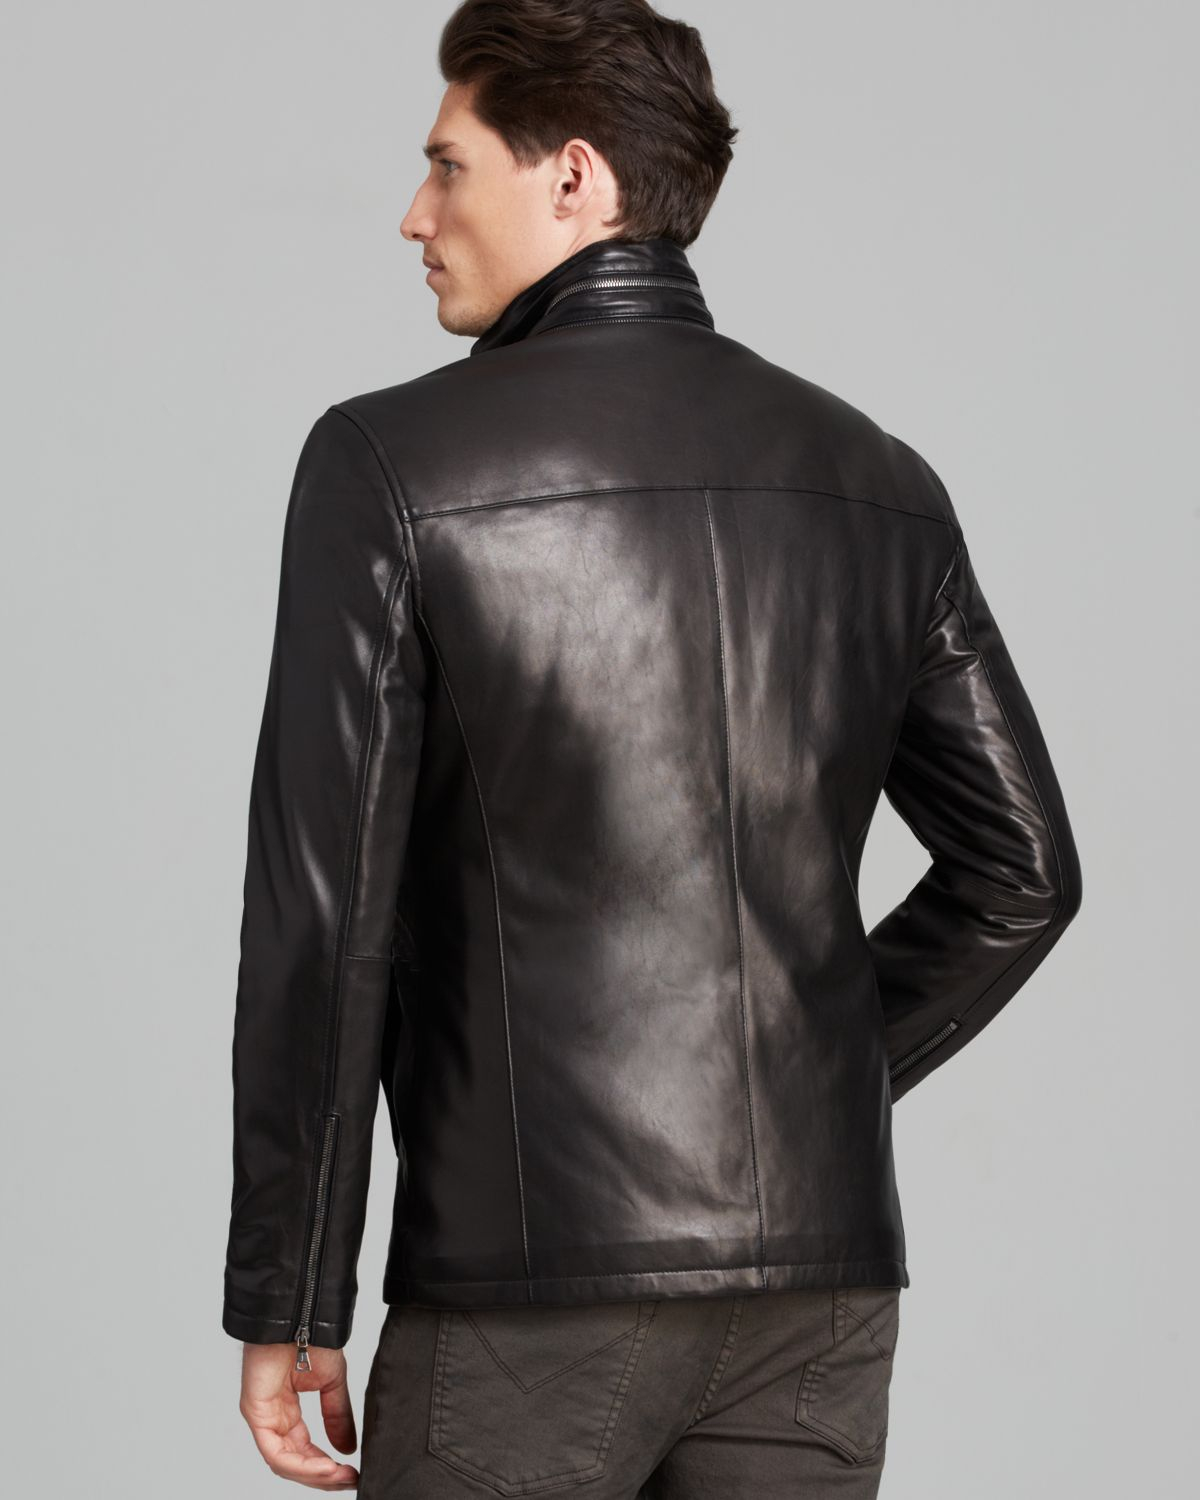 Lyst - John Varvatos Collection Double Zip Leather Jacket in Black for Men